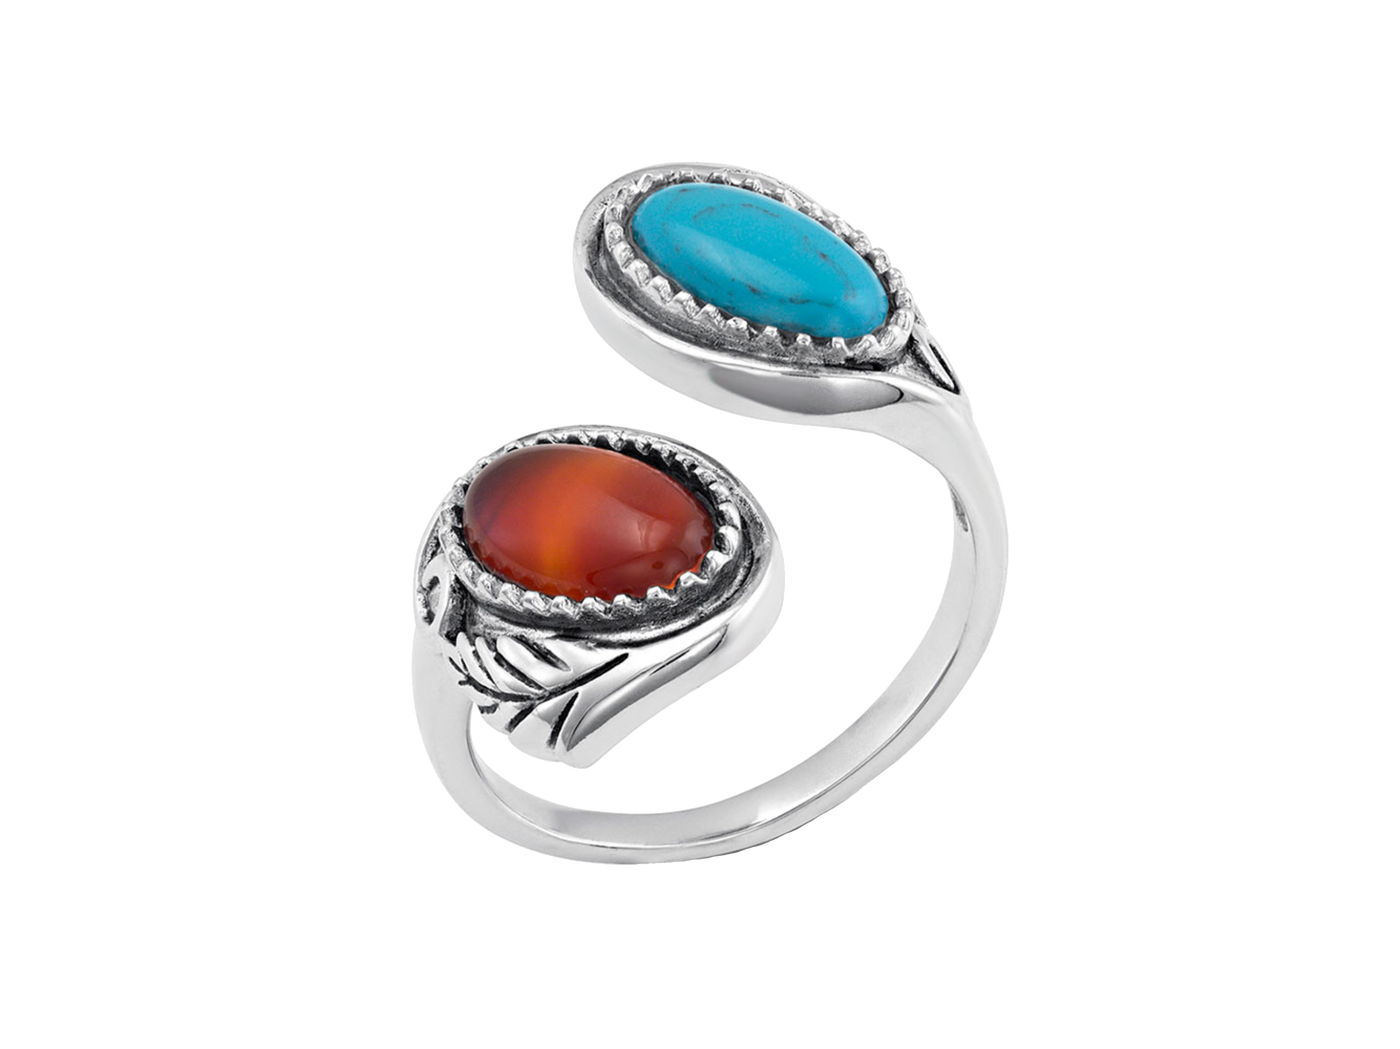 This Montana Silversmiths' wrap around, sterling silver ring contains both a light red stone, for the Earth, sitting atop a light blue turquoise stone, for the sky. Our "Earth and Sky Adjustable Ring" is a reminder to stay grounded and shoot for the stars. One size fits most.